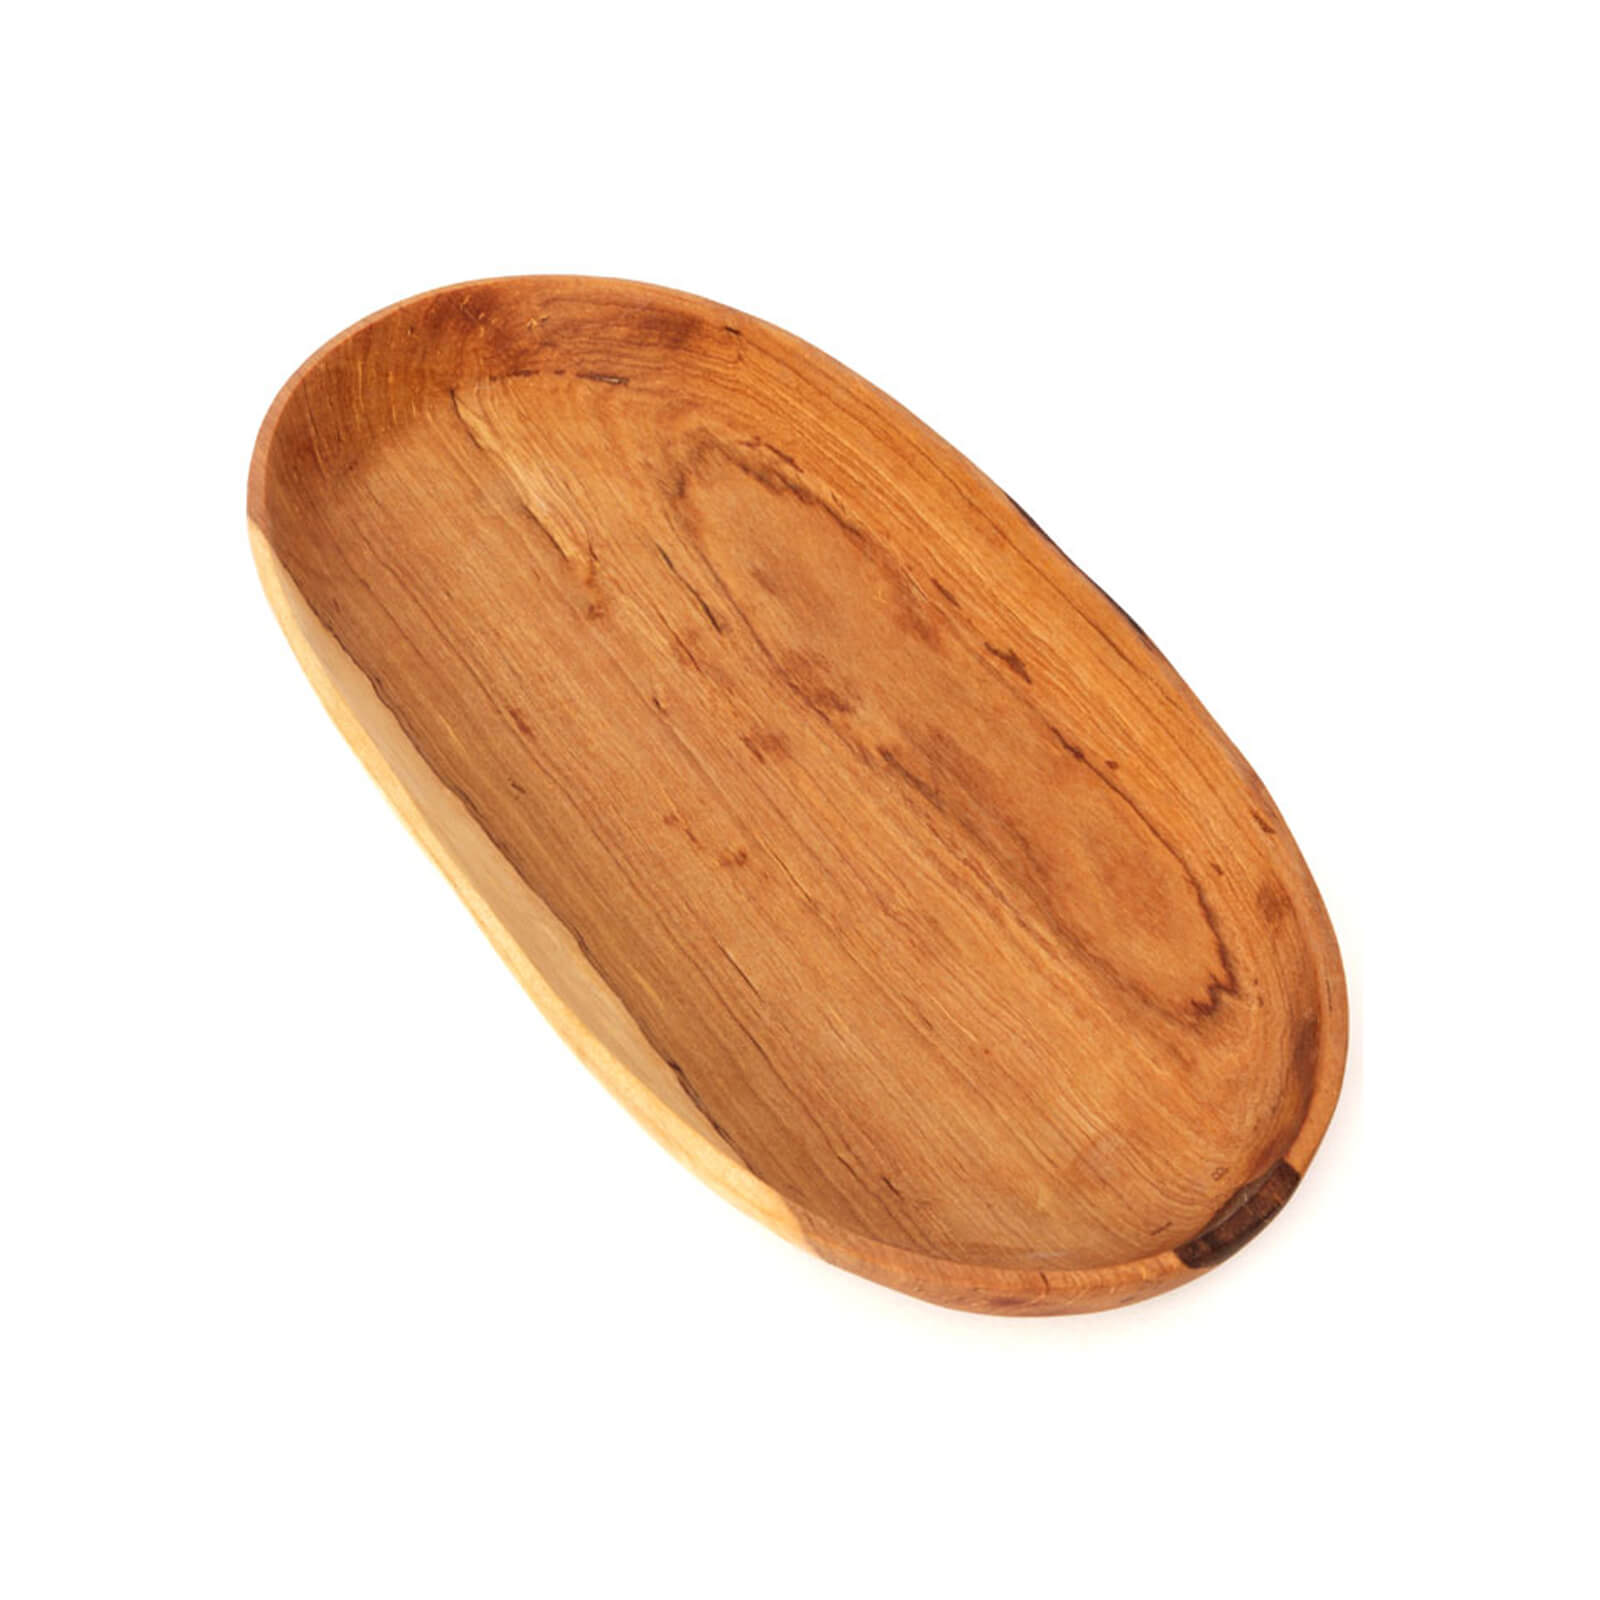 Hand Carved Wild Olive Wood Serving Tray - Oval